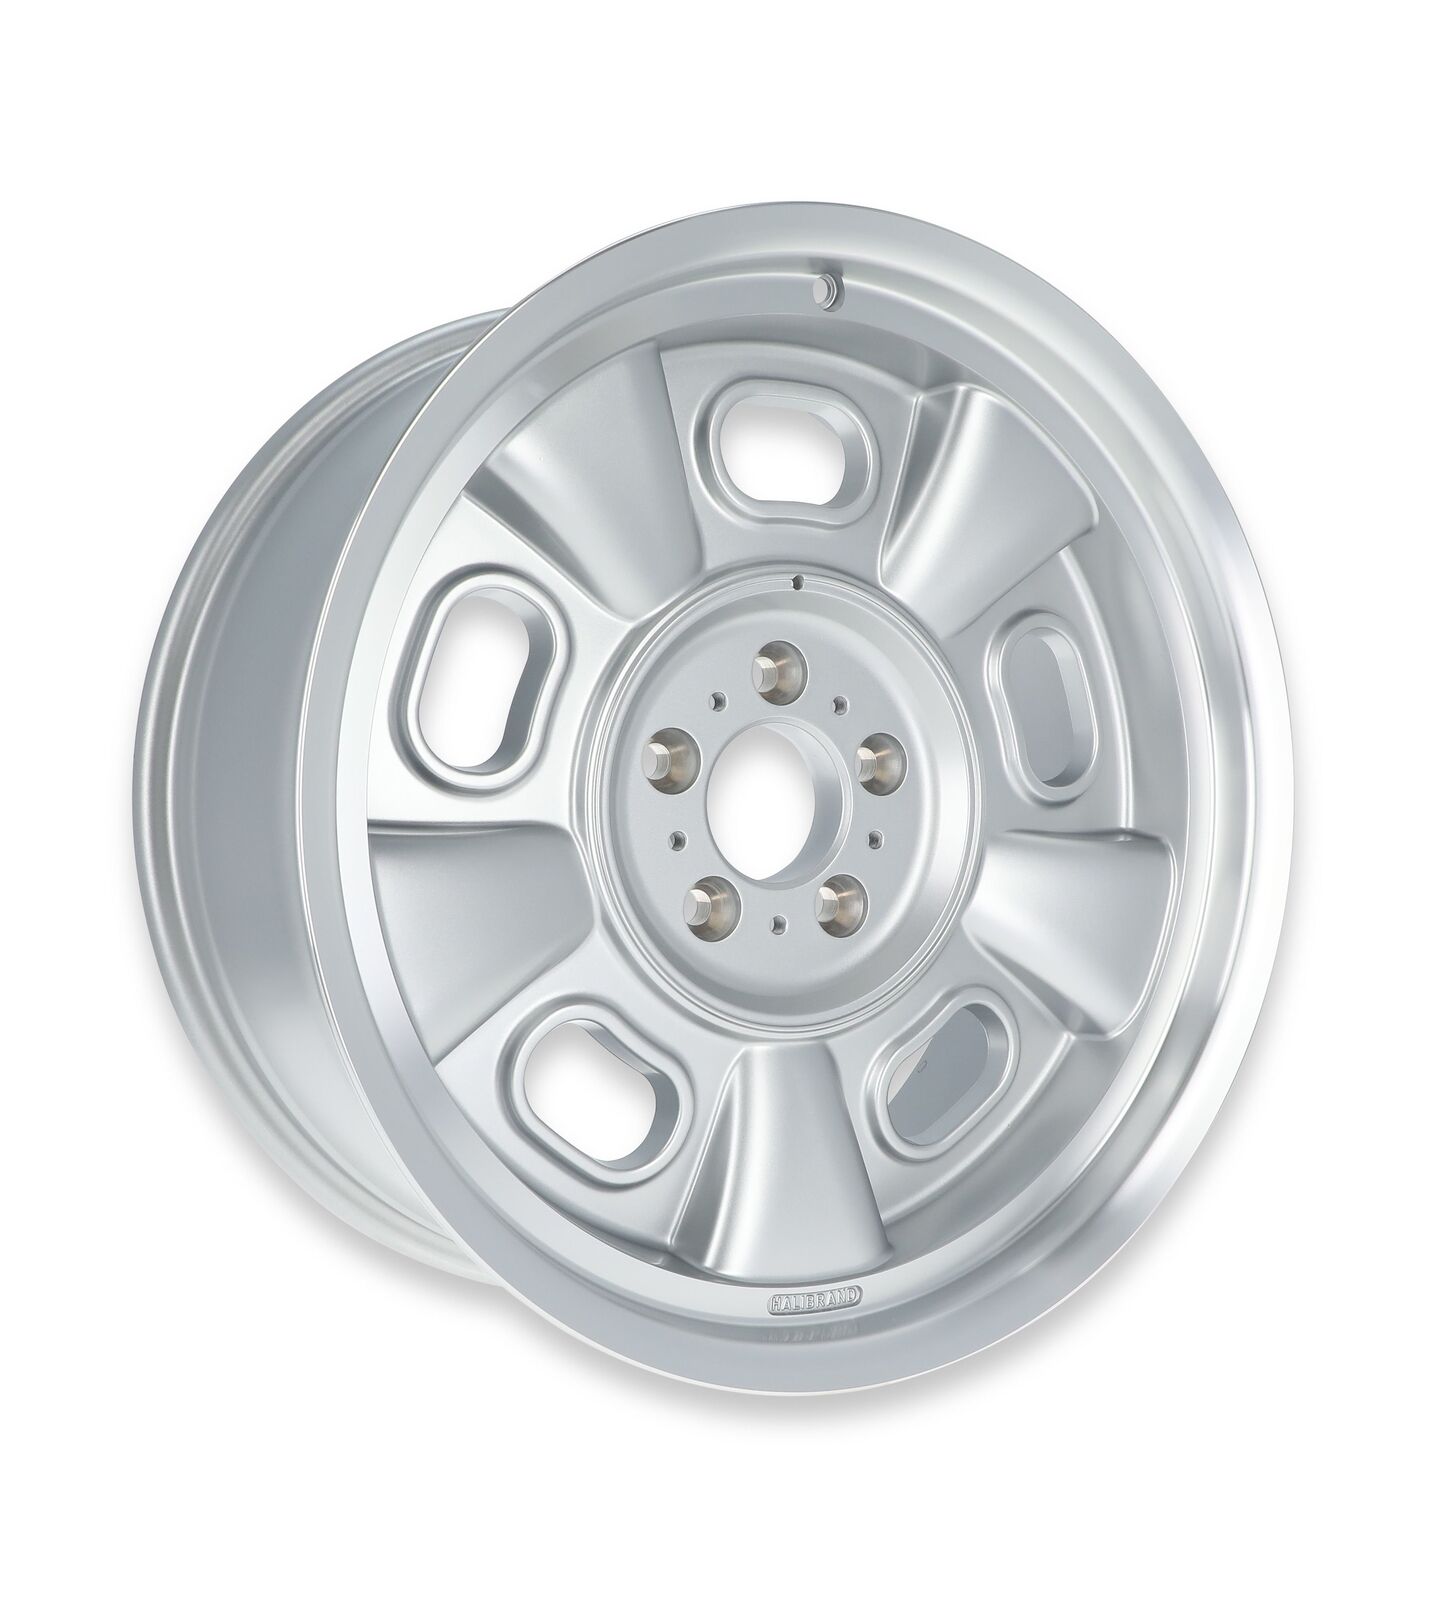 Halibrand HB002-008 Indy Roadster Wheel 20x8.5 - 5.25 bs Silver Machined - Each